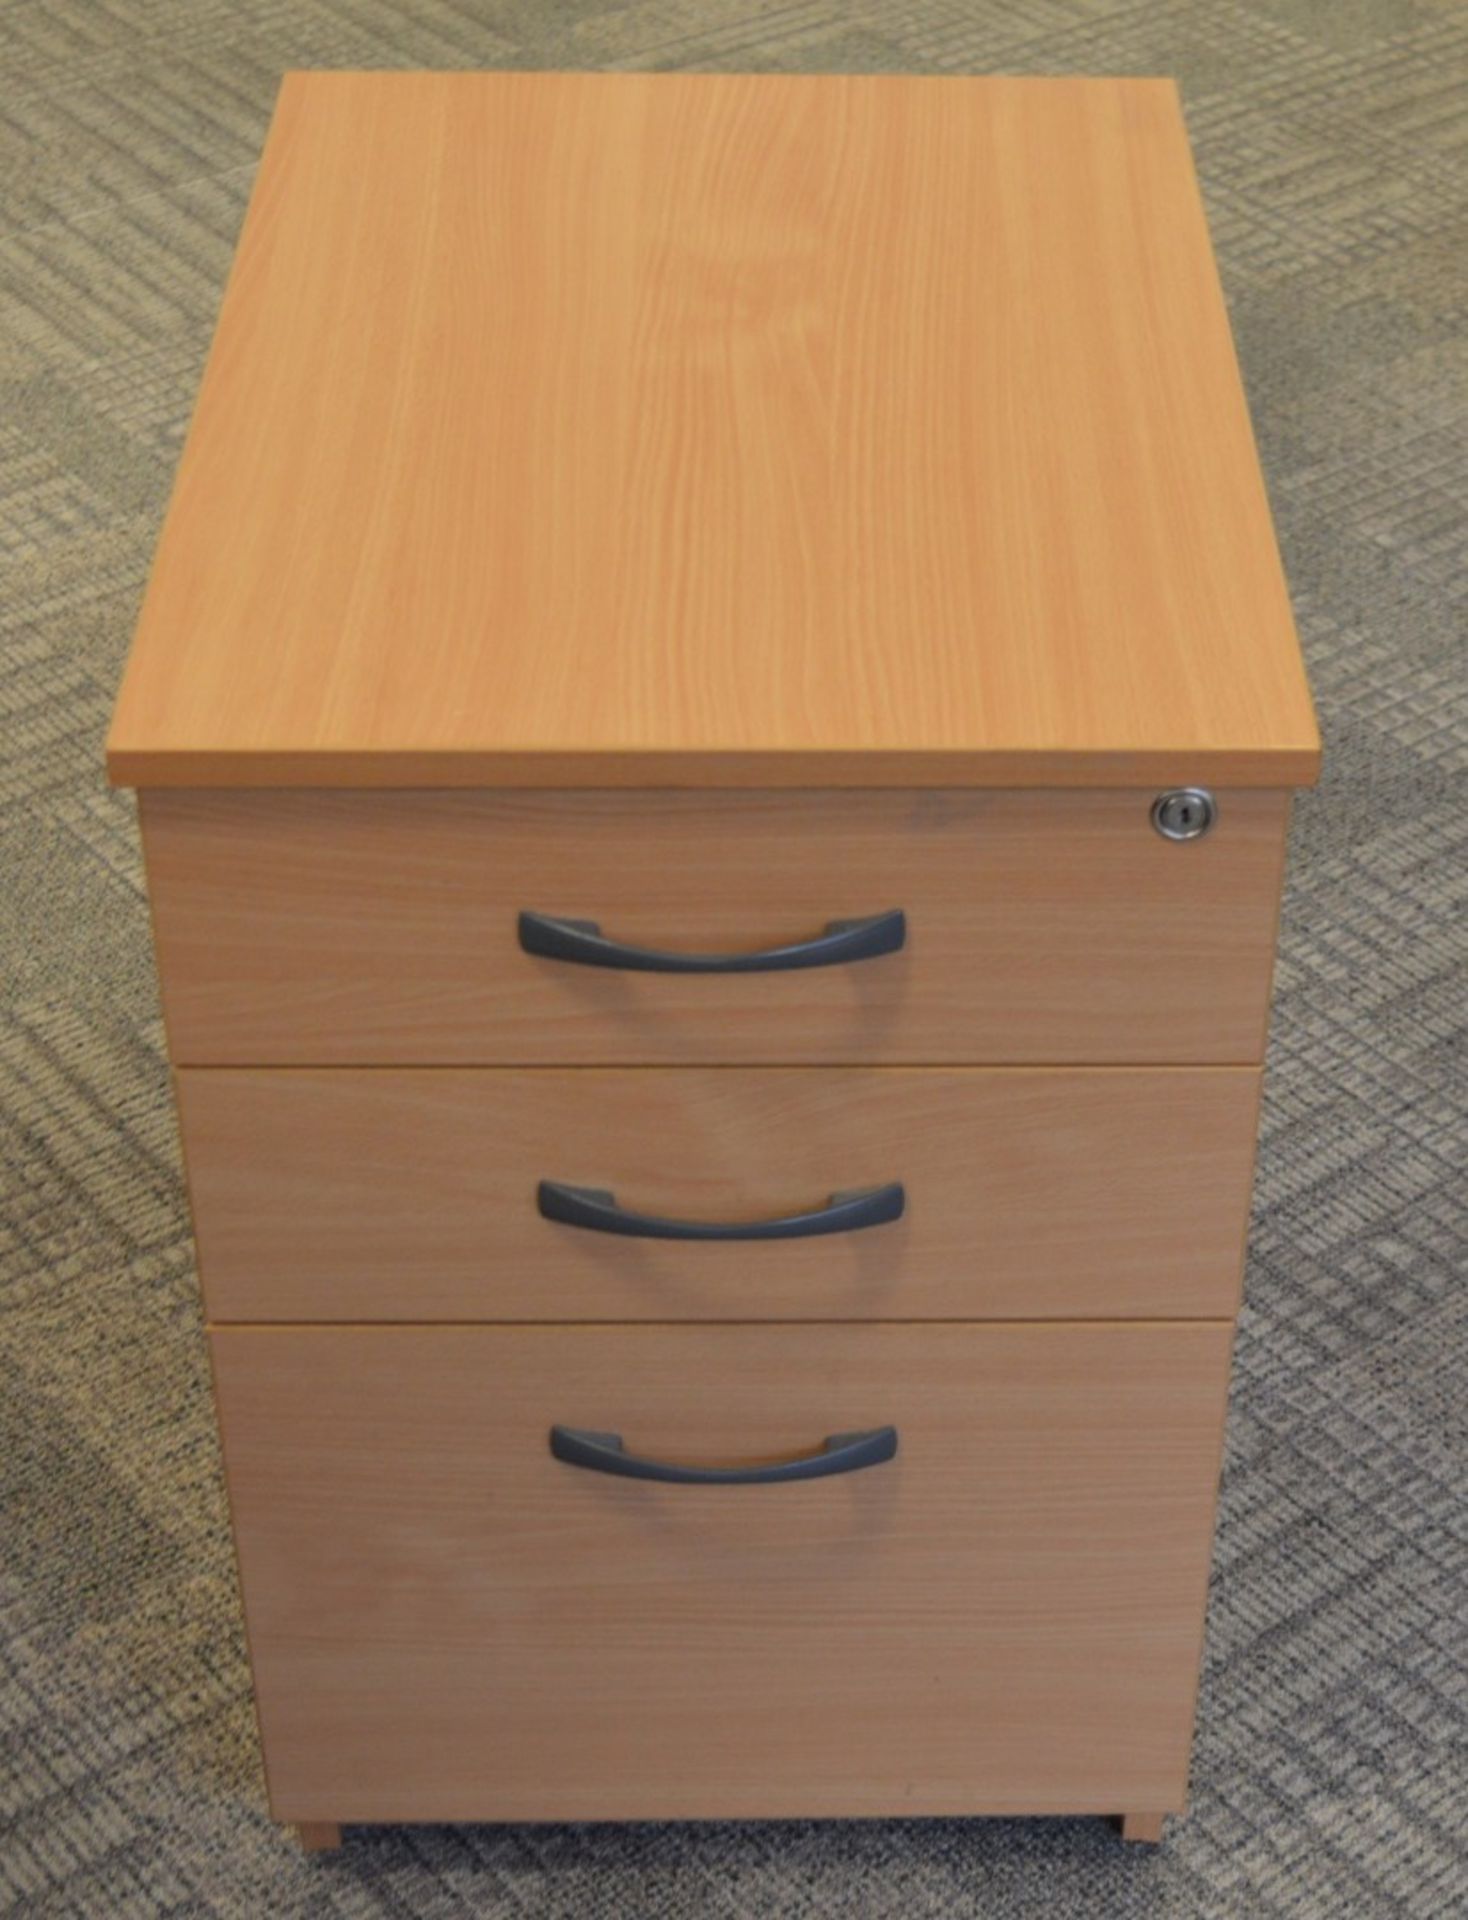 1 x Three Drawer Mobile Pedestal Drawers - With Key - Modern Beech Finish - Two Storage Drawers - Image 3 of 5